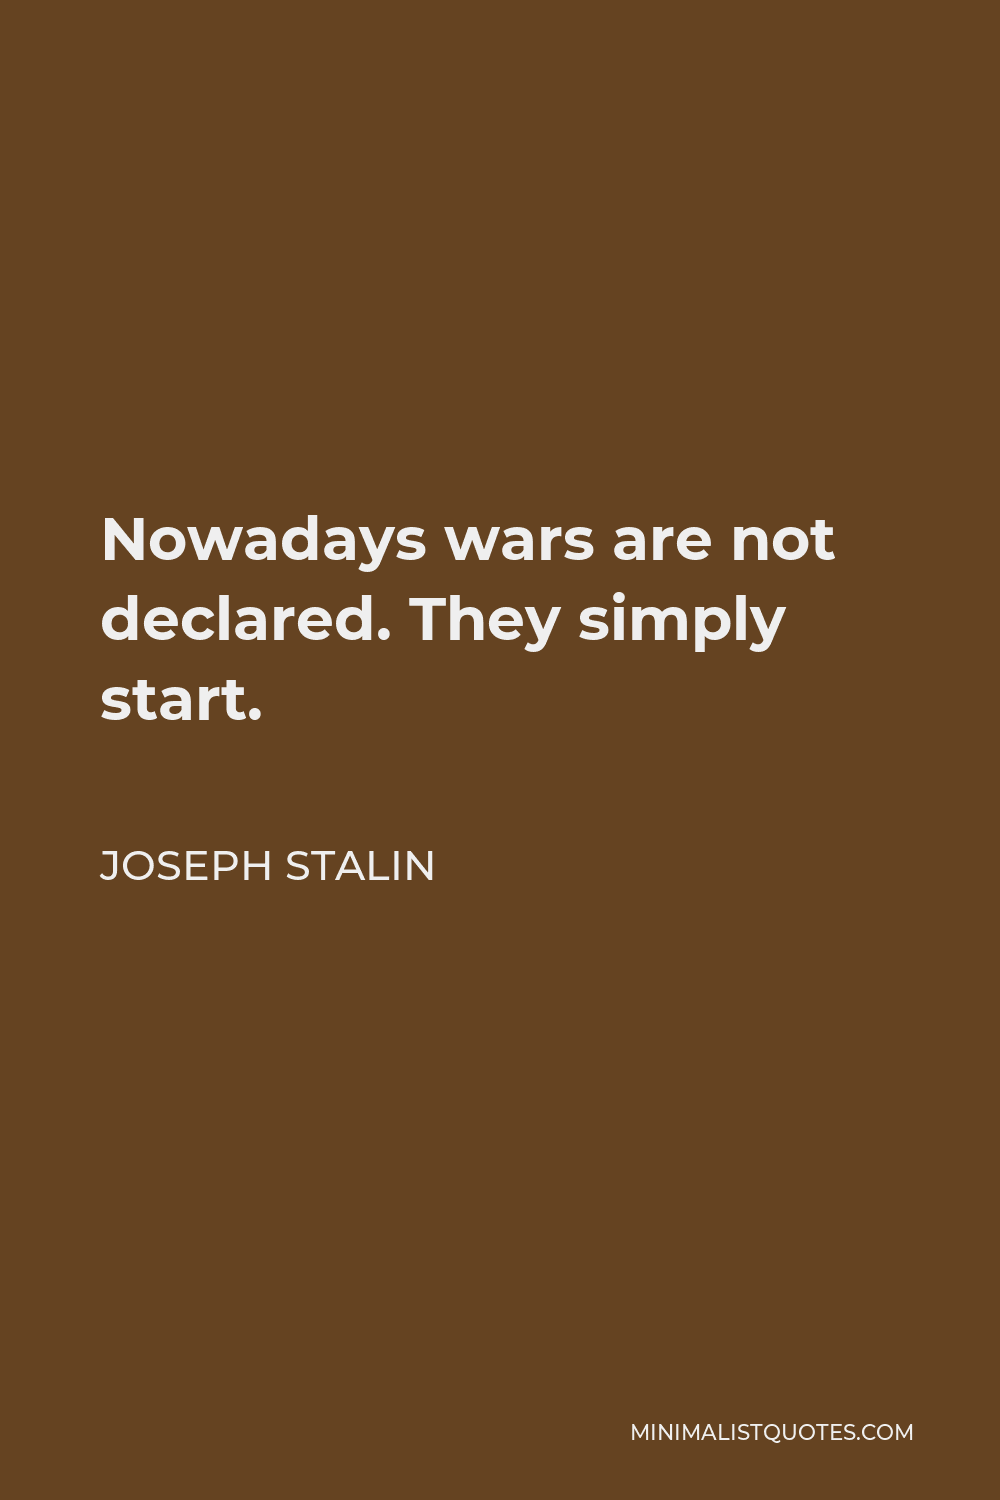 Joseph Stalin Quote - Nowadays wars are not declared. They simply start.